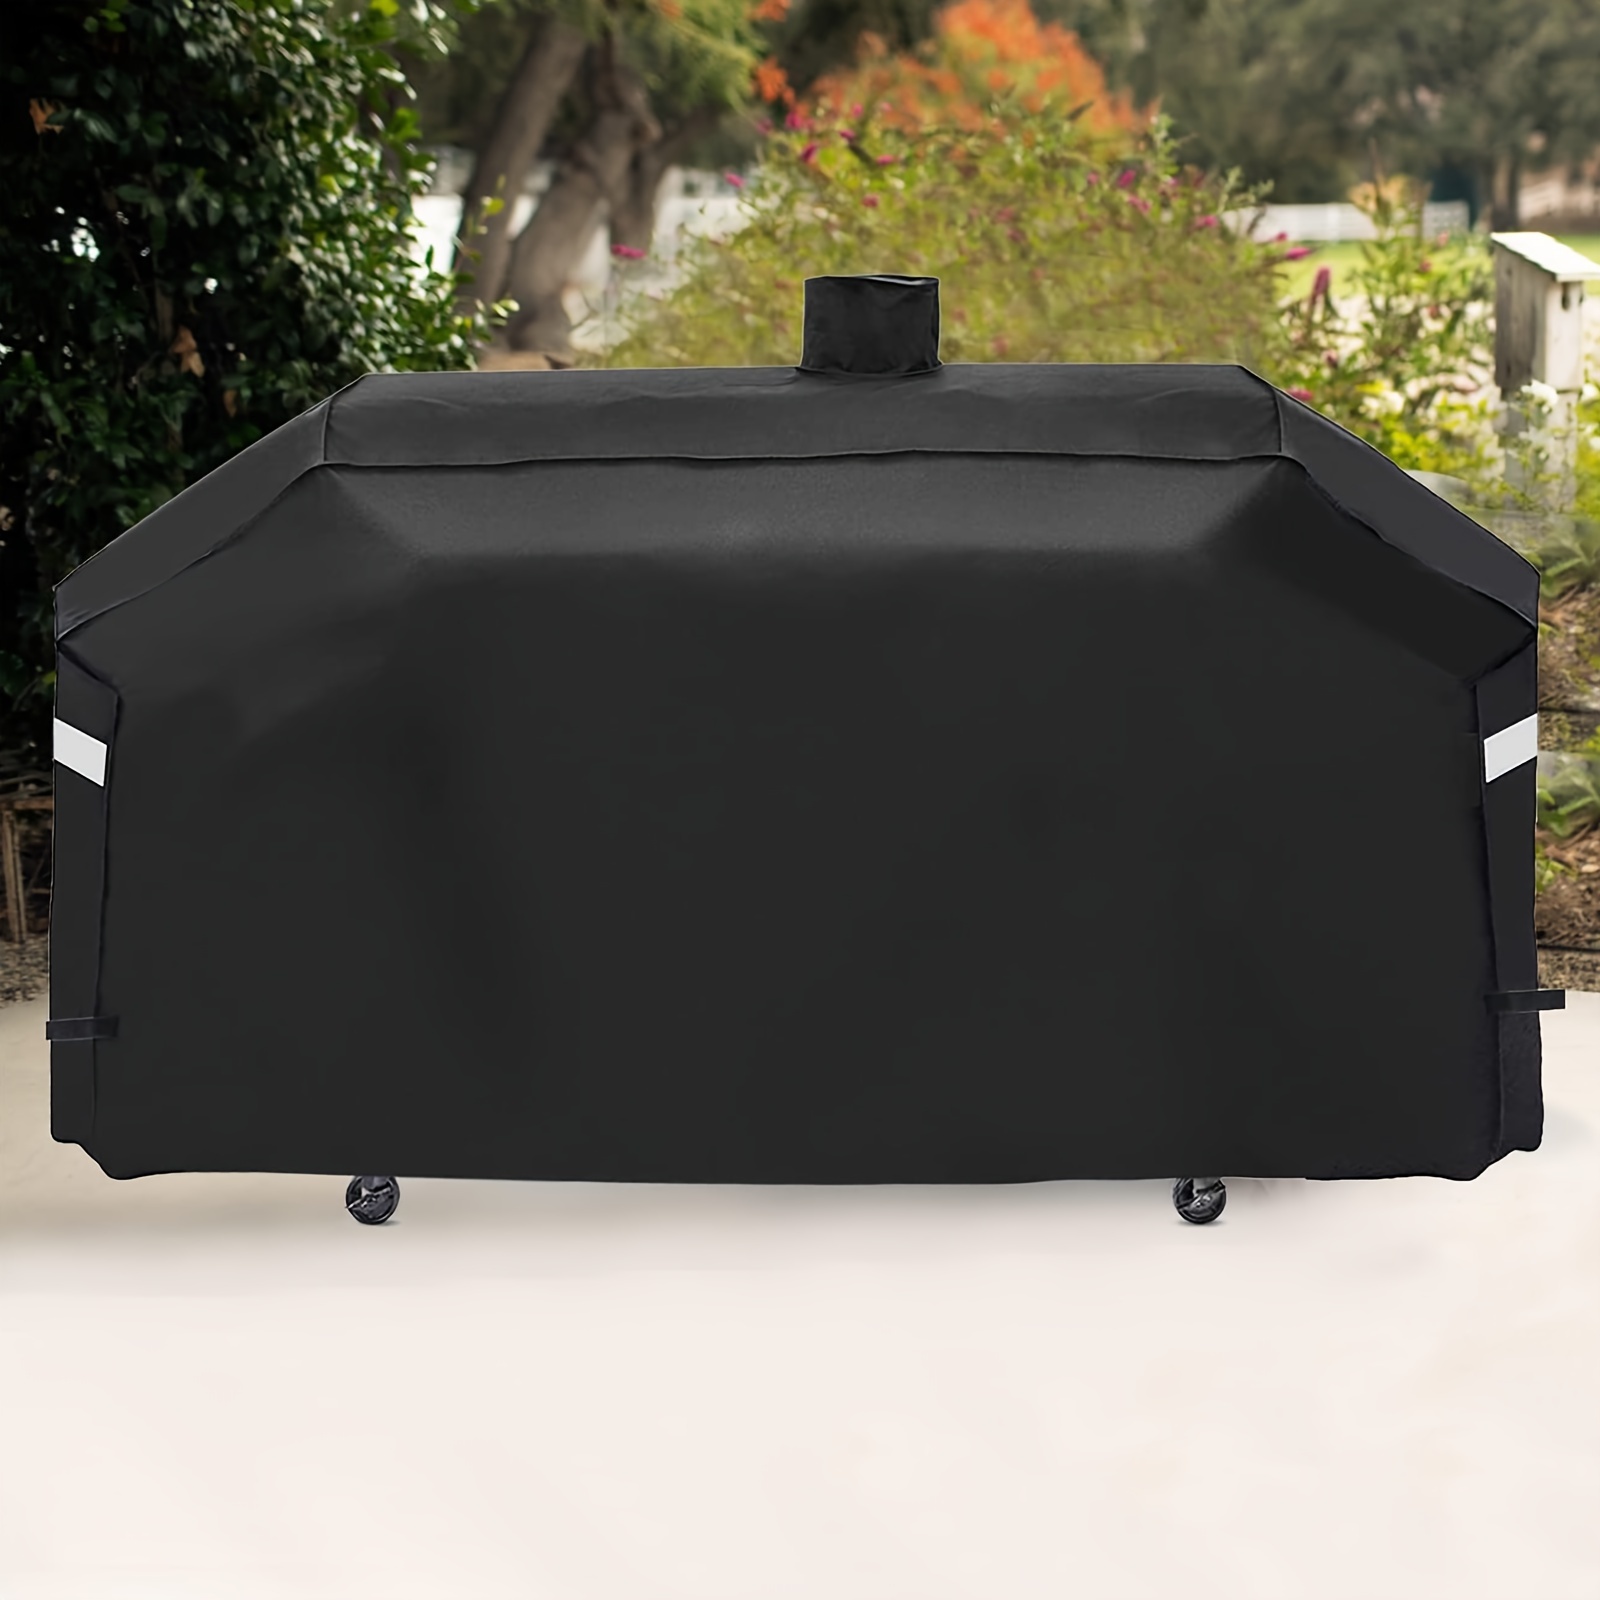 

1pc, 79 Inch Outdoor Bbq Cover, Weatherproof Bbq Grill Cover, Anti-fade, Suit For Smoke Hollow 4 In 1 Charcoal Combo Grill Ps9900, Memphis Ultimate Grill